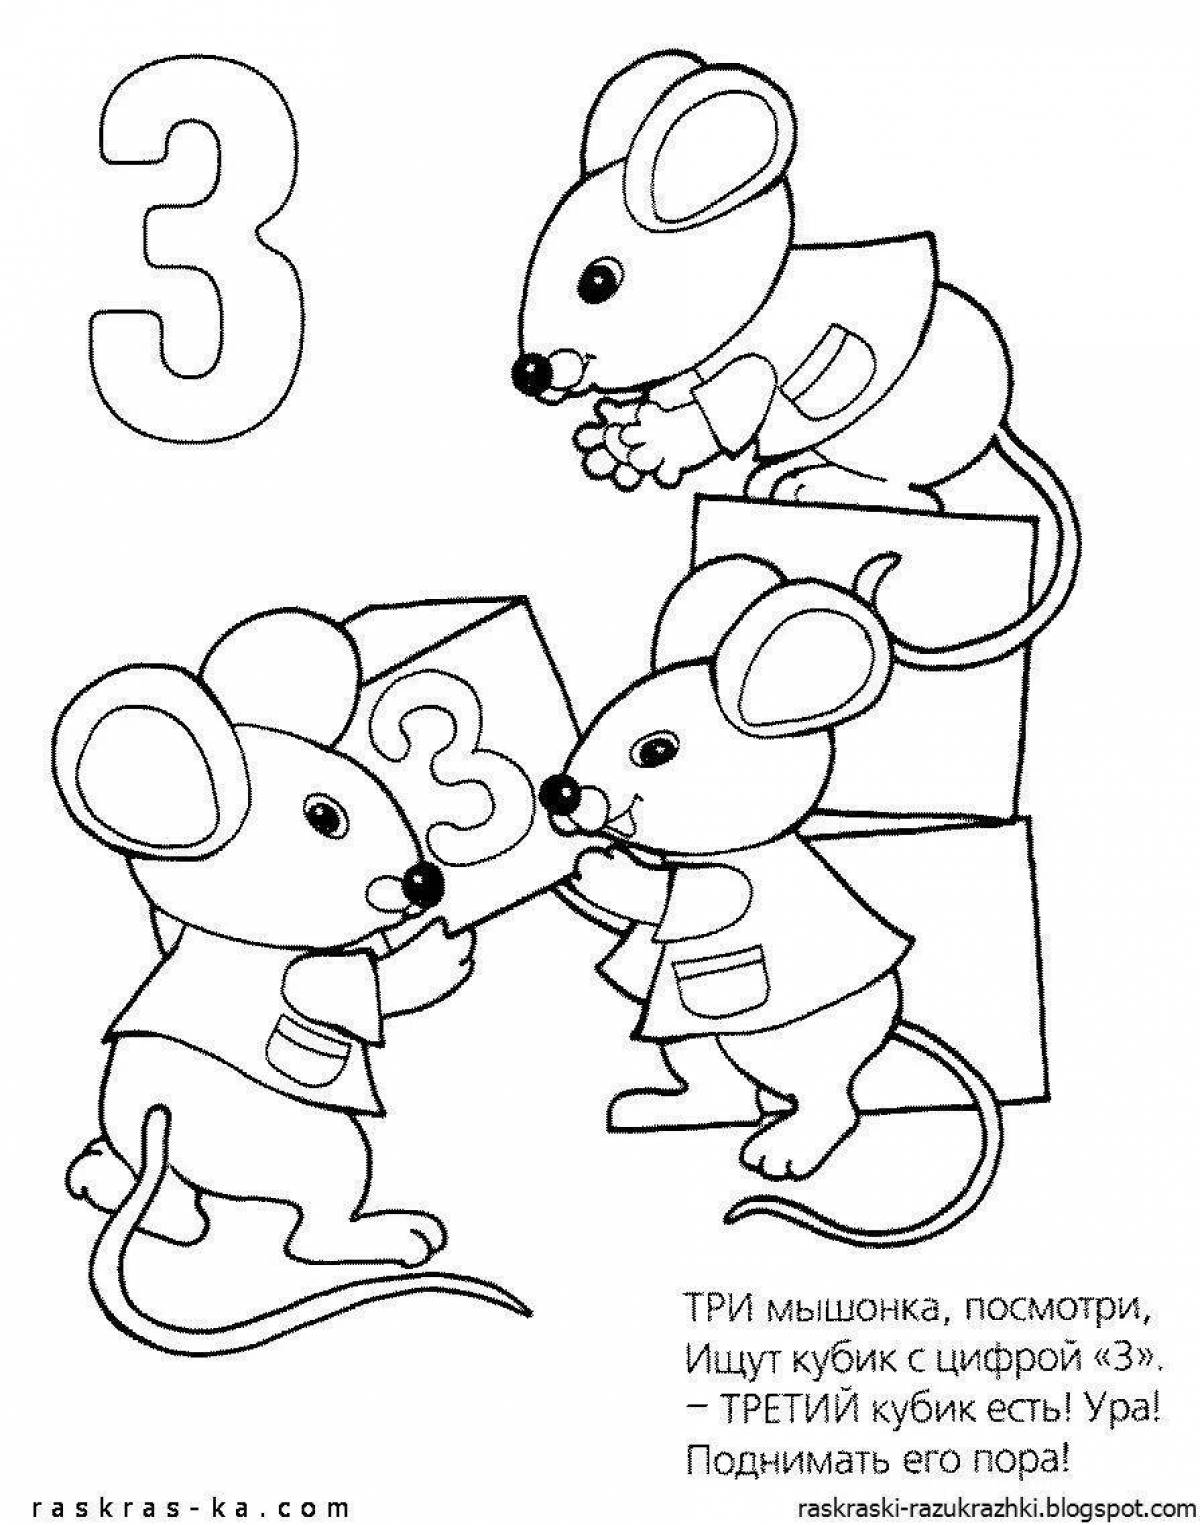 Delightful mouse coloring book for 3-4 year olds